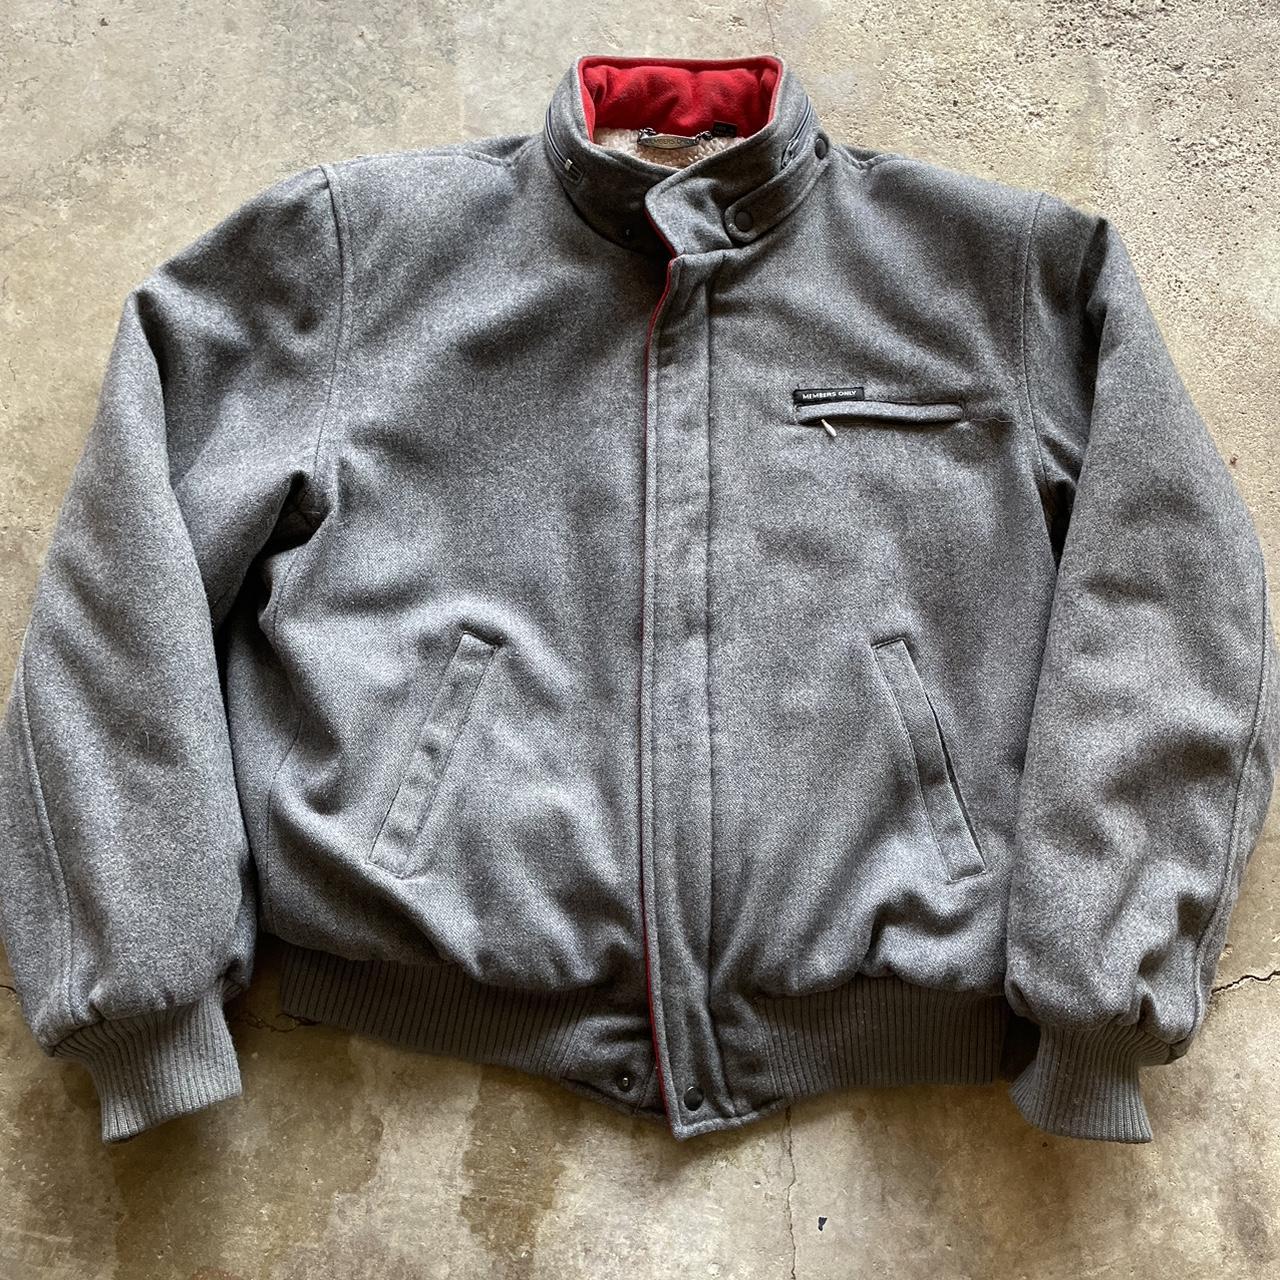 Members Only Men's Grey and Red Jacket